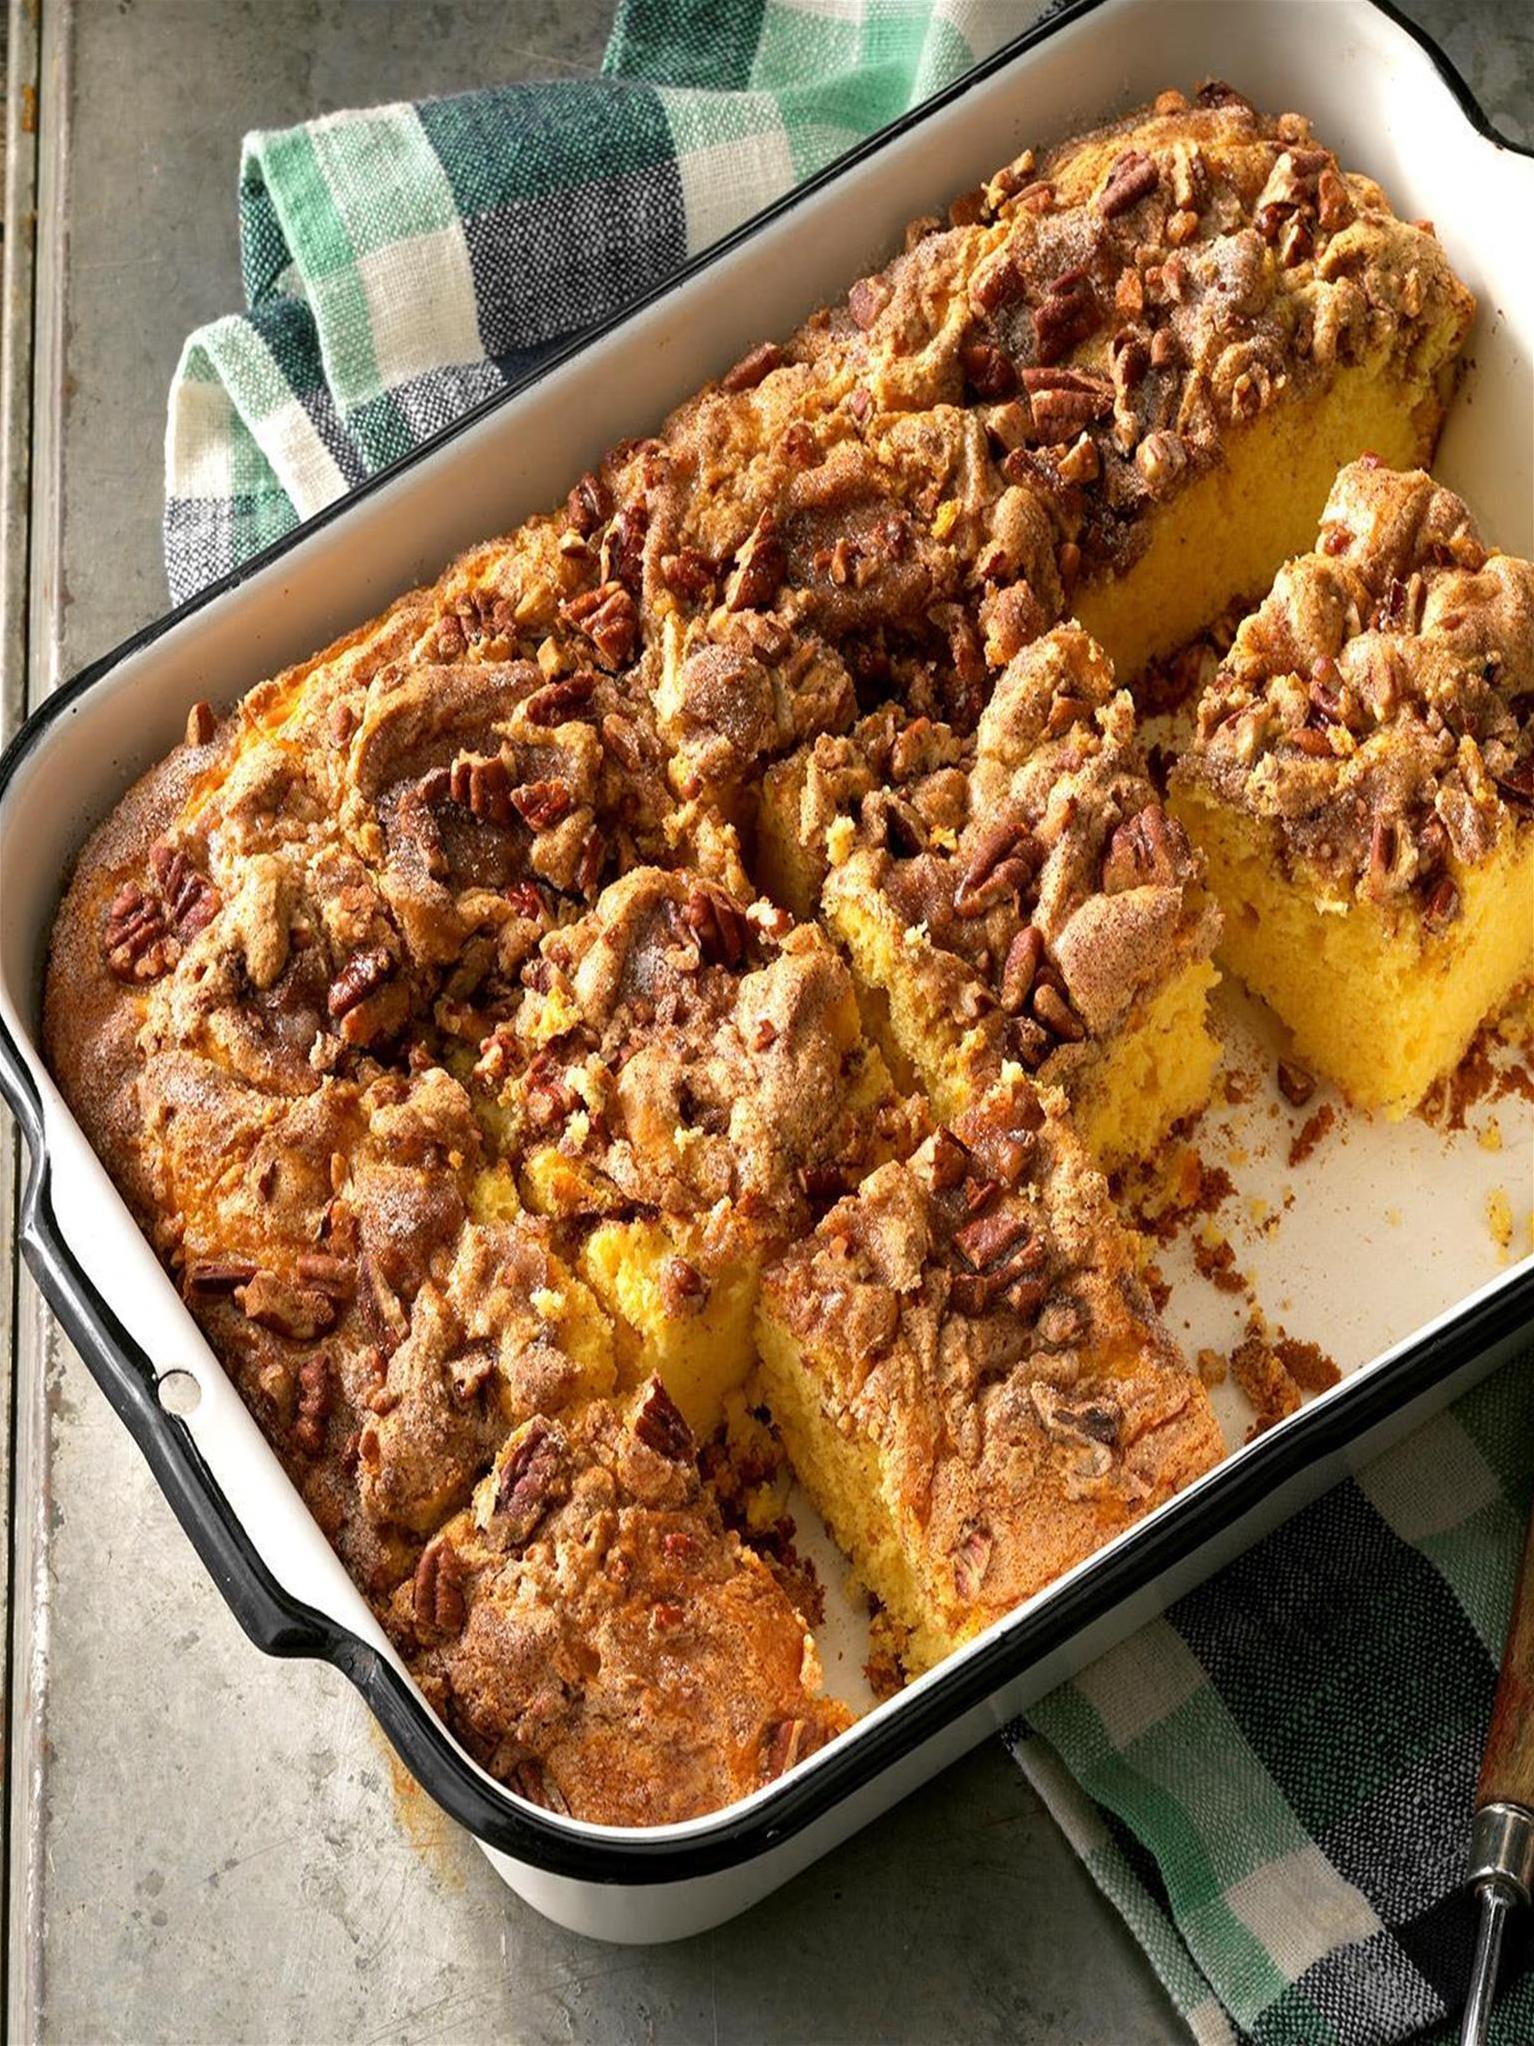  Warm, buttery, nutty, and sweet - Pecan Streusel Coffee Cake ticks all the boxes.